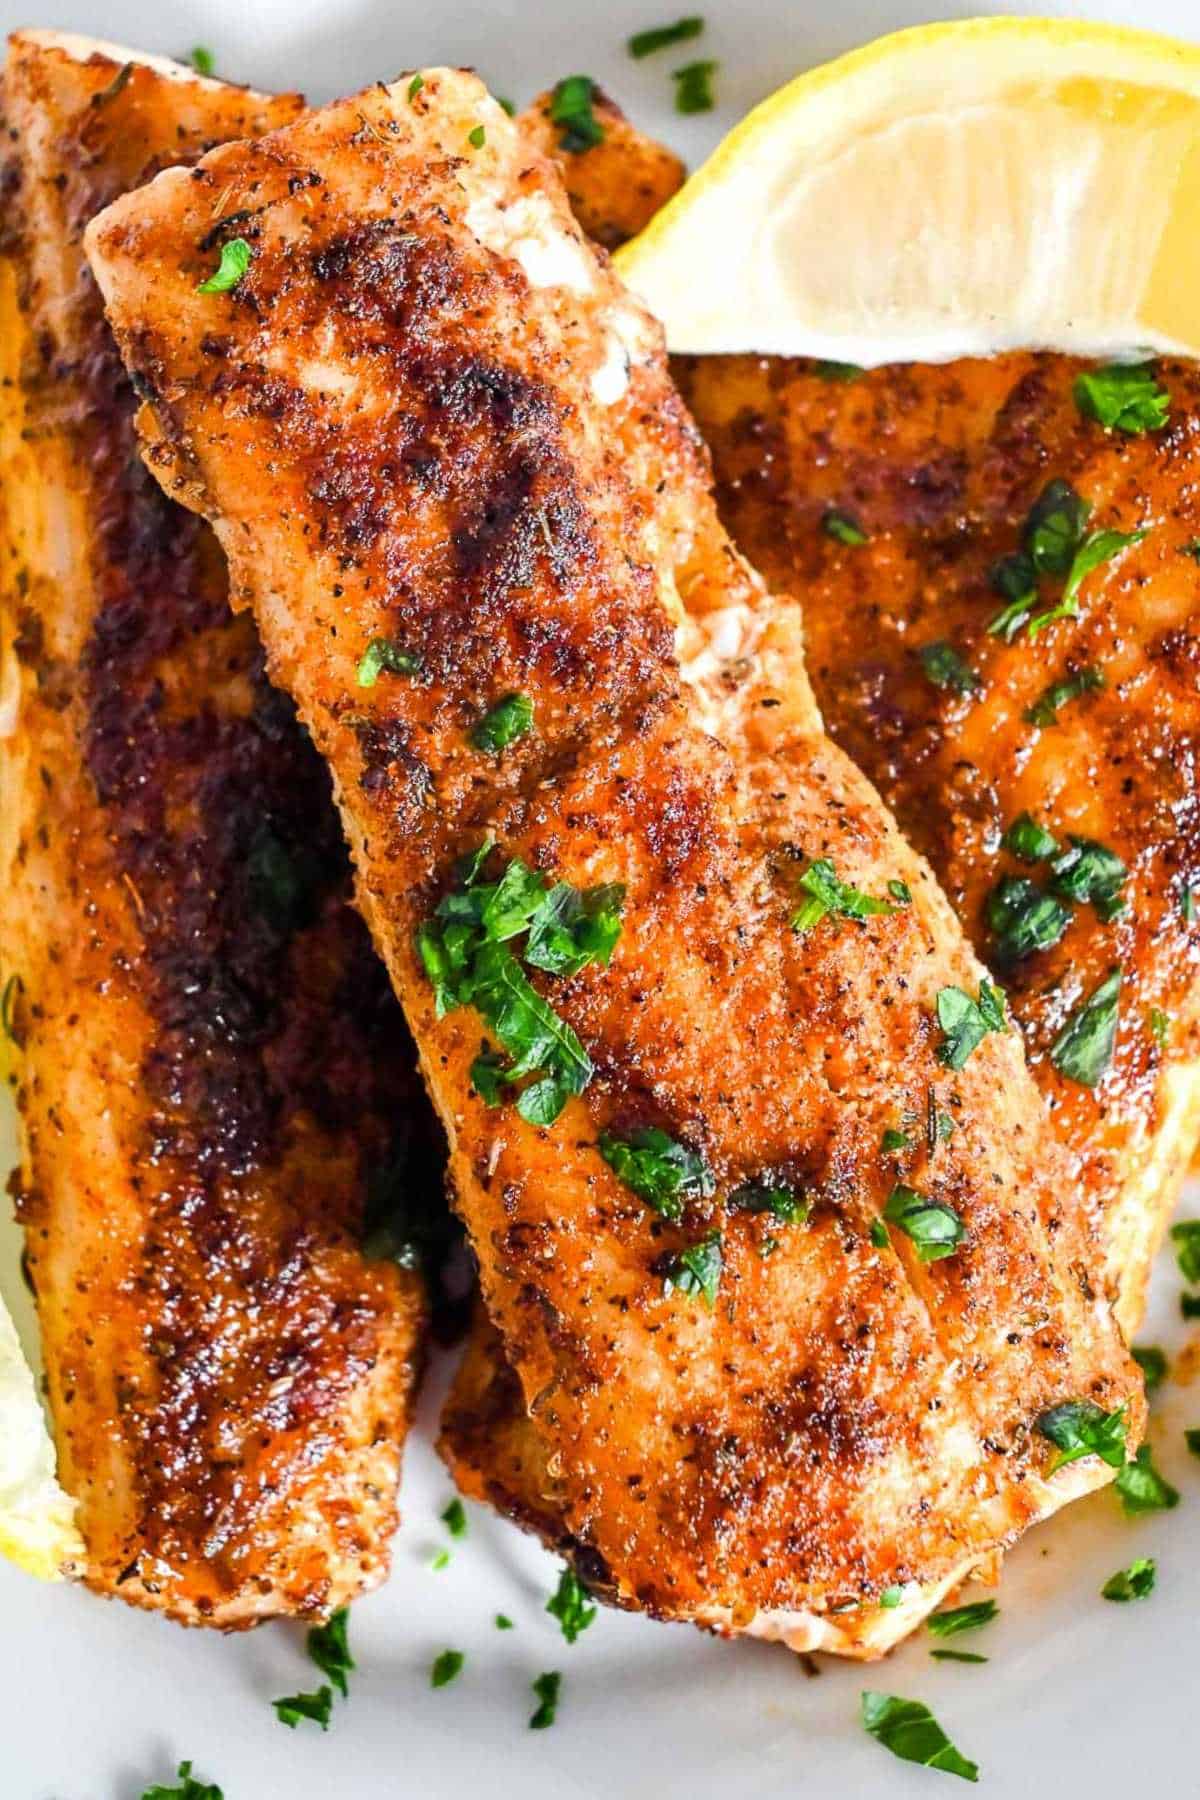 mahi mahi fillets seasoned with cajun spices and topped with parsley and a lemon wedge.